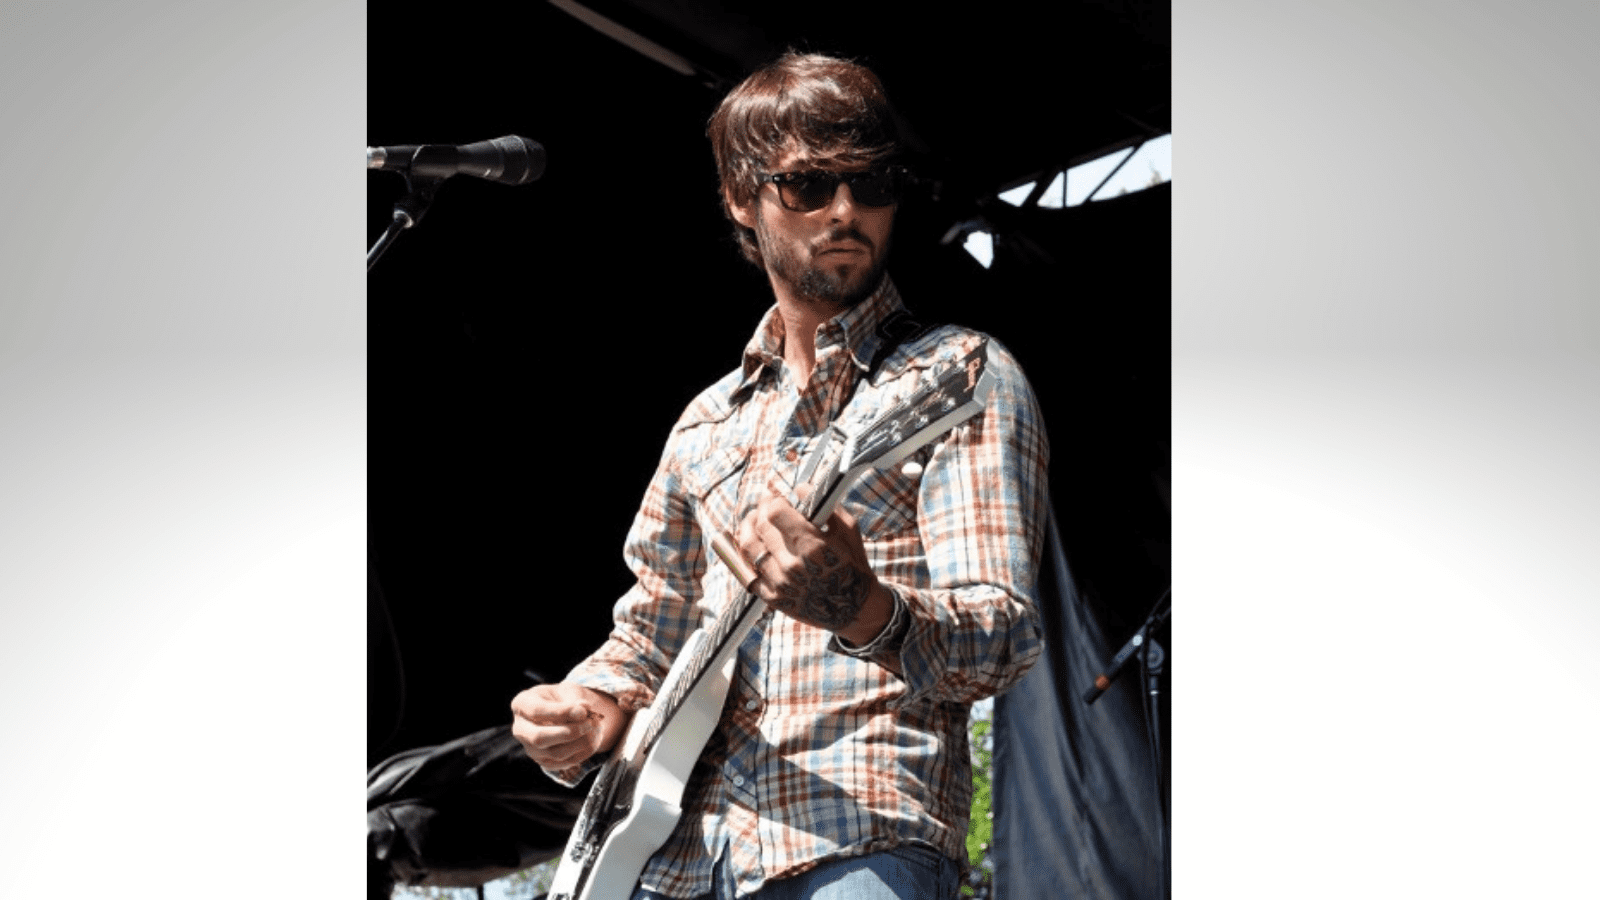 Ryan Bingham, live at the Fort Worth Stock Show and Rodeo | Image by Wikimedia